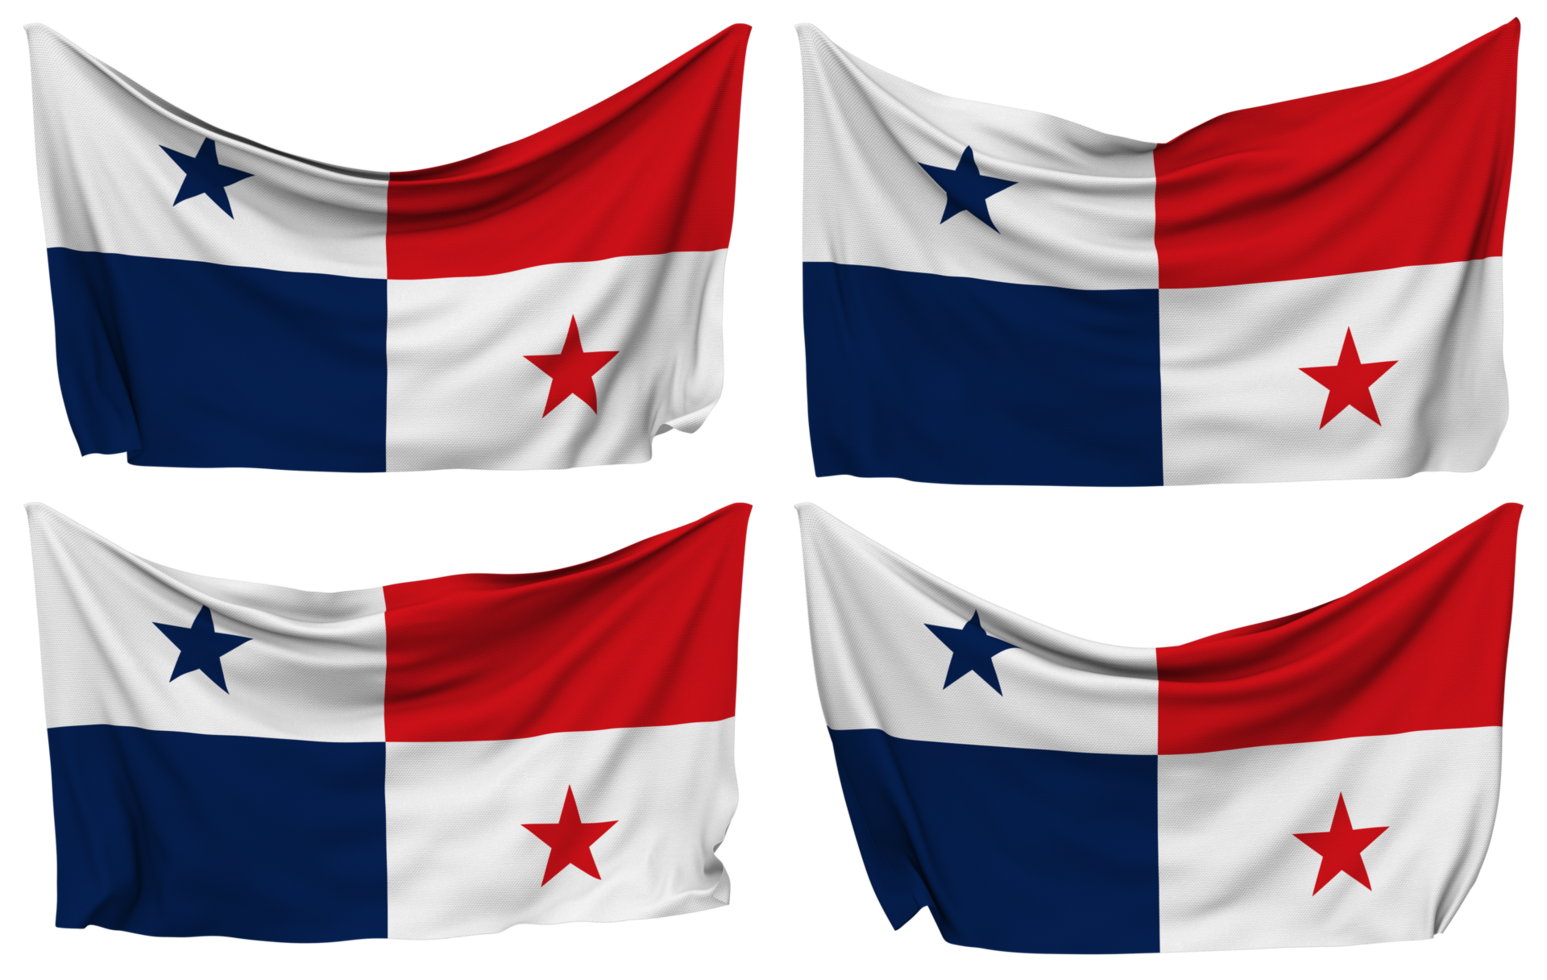 Panama Pinned Flag from Corners, Isolated with Different Waving Variations, 3D Rendering png